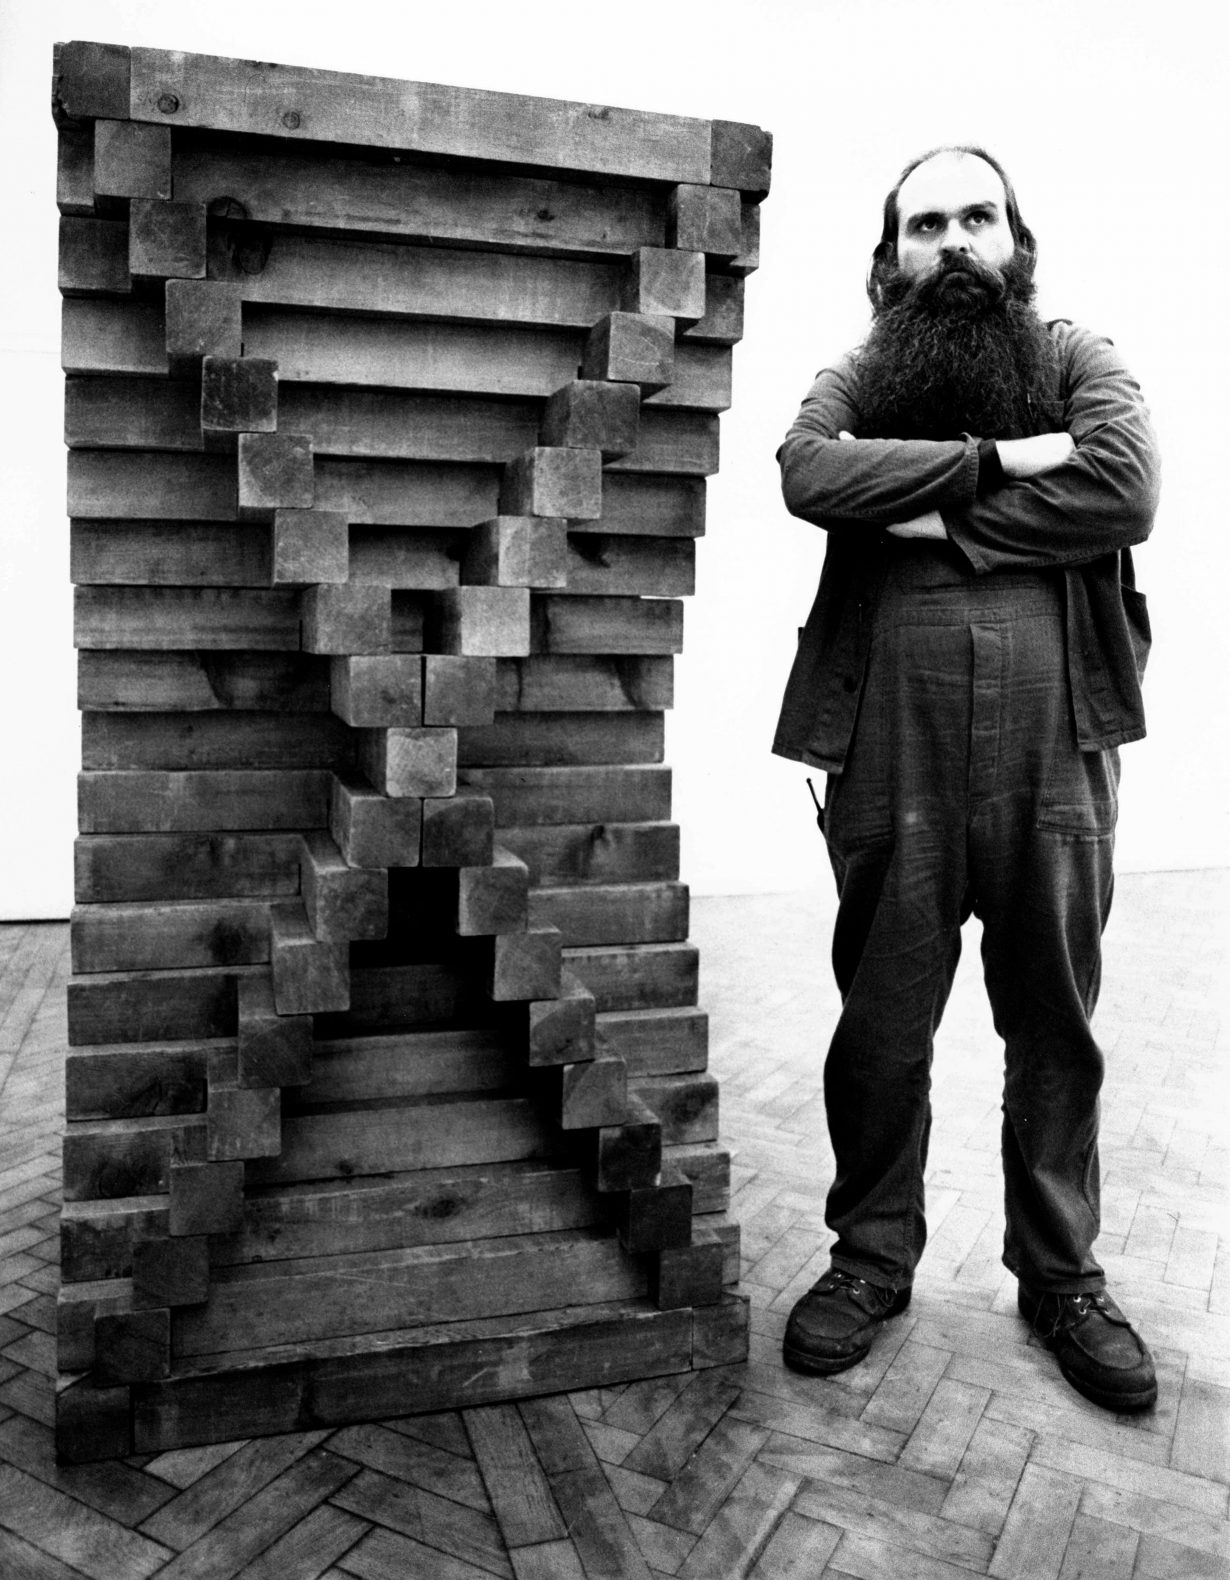 Carl Andre, Minimalist sculptor, 1935–2024 - ArtReview